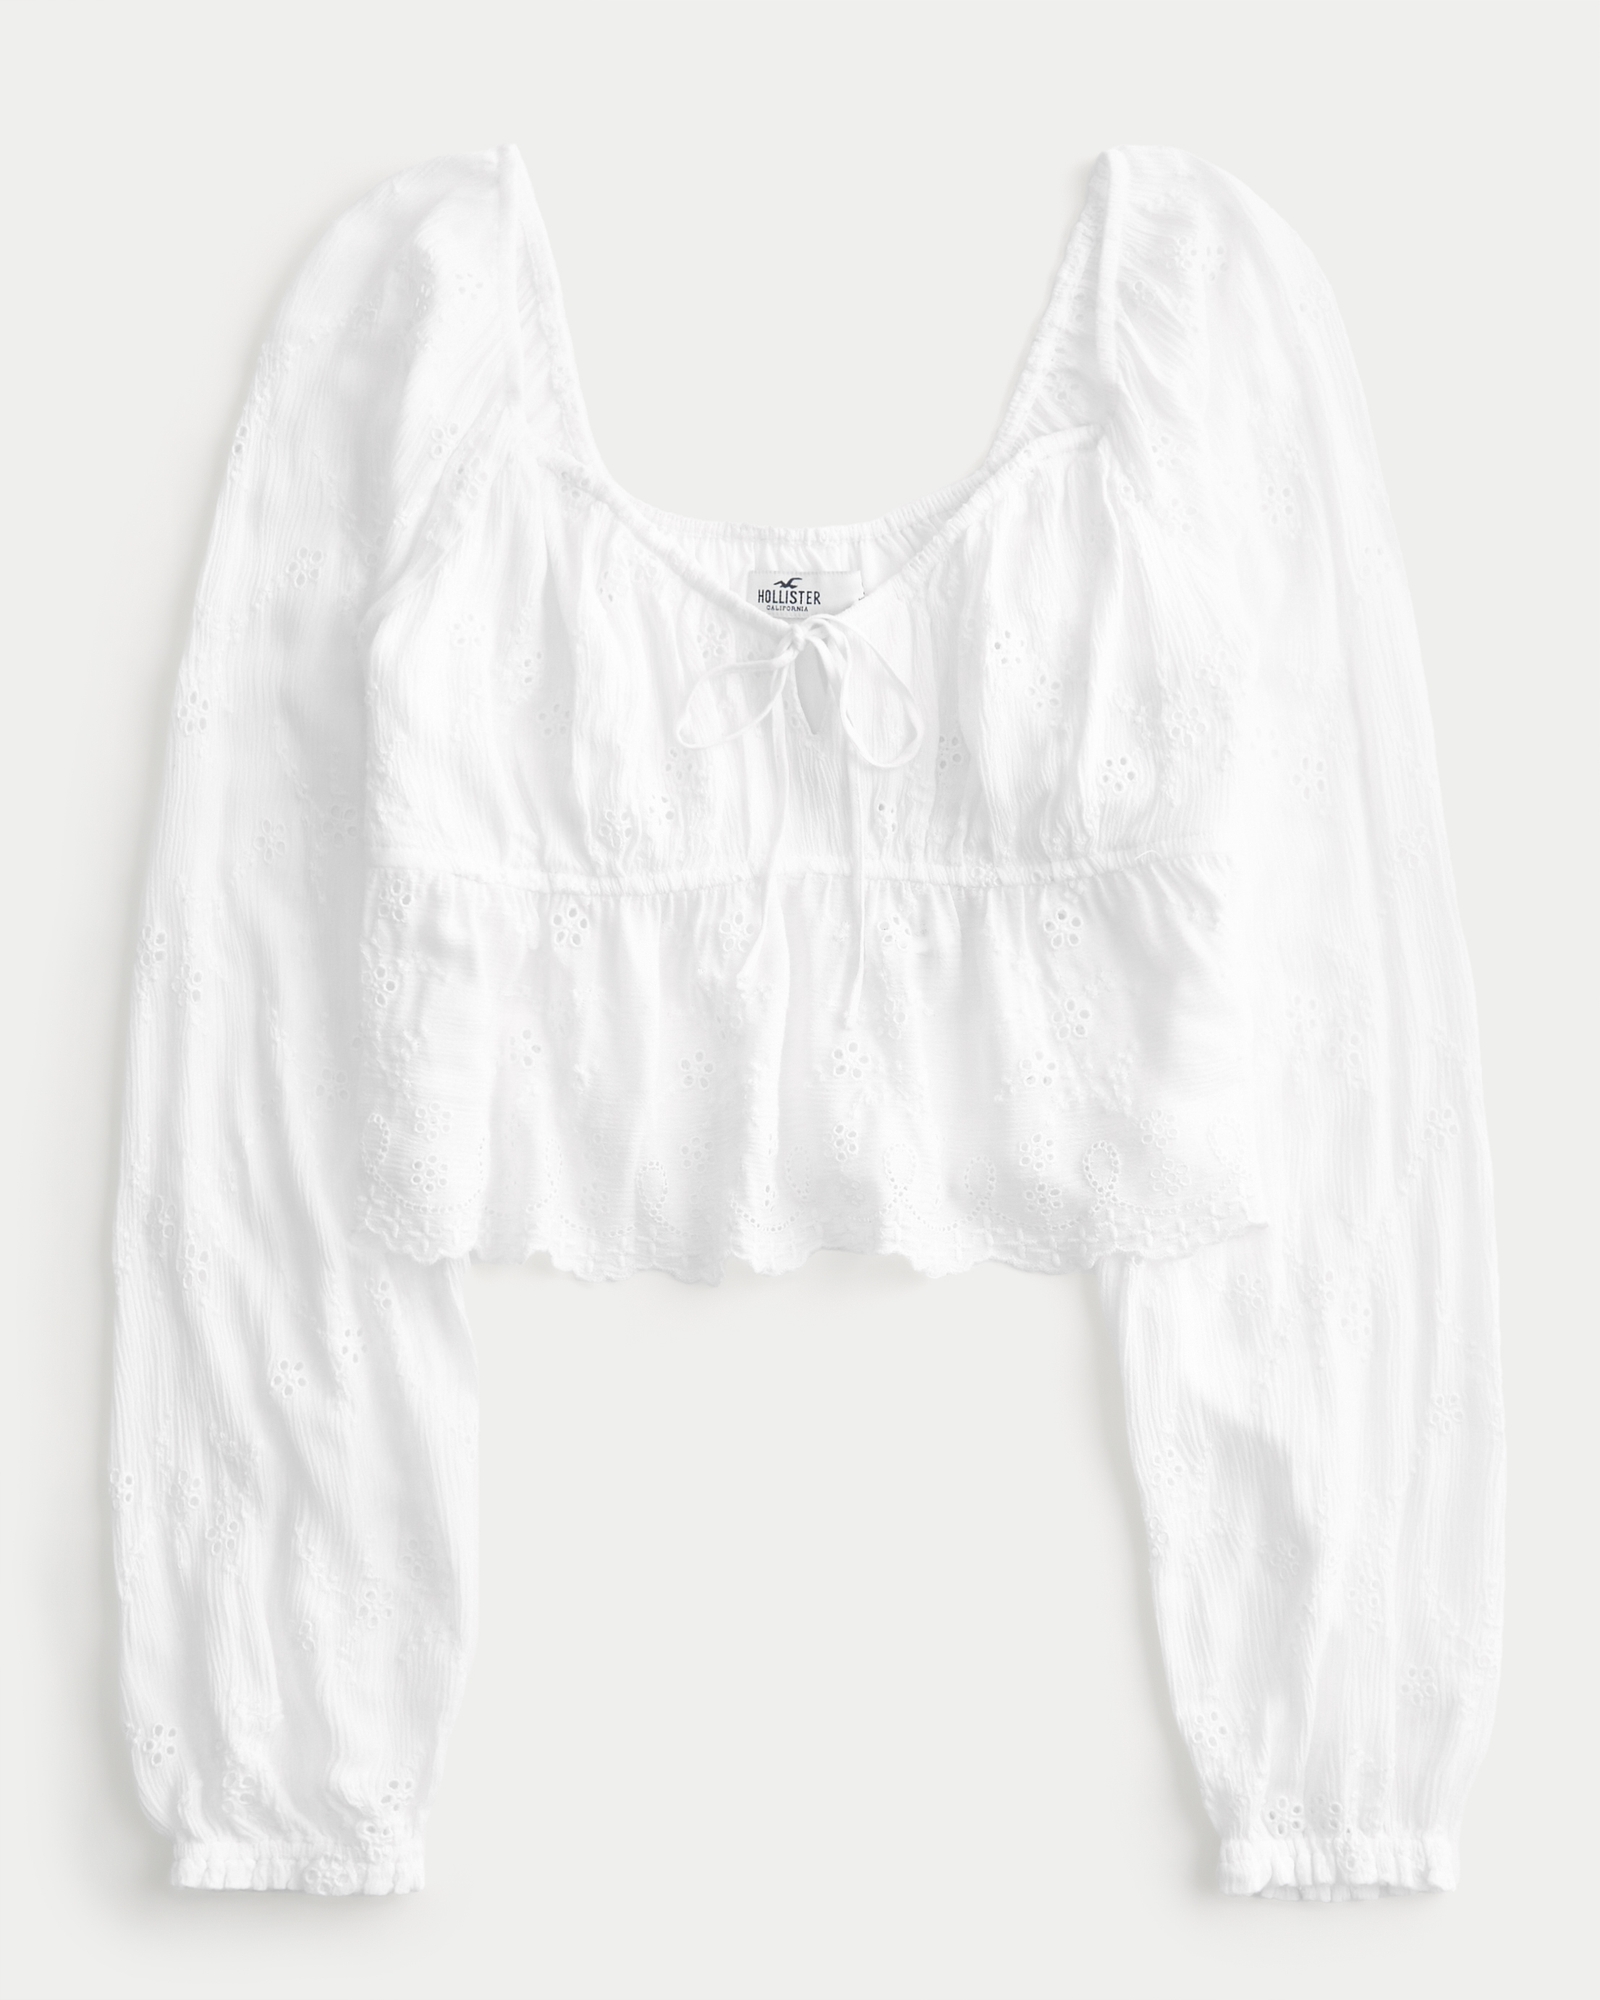 https://img.hollisterco.com/is/image/anf/KIC_340-3218-0031-100_prod1.jpg?policy=product-extra-large